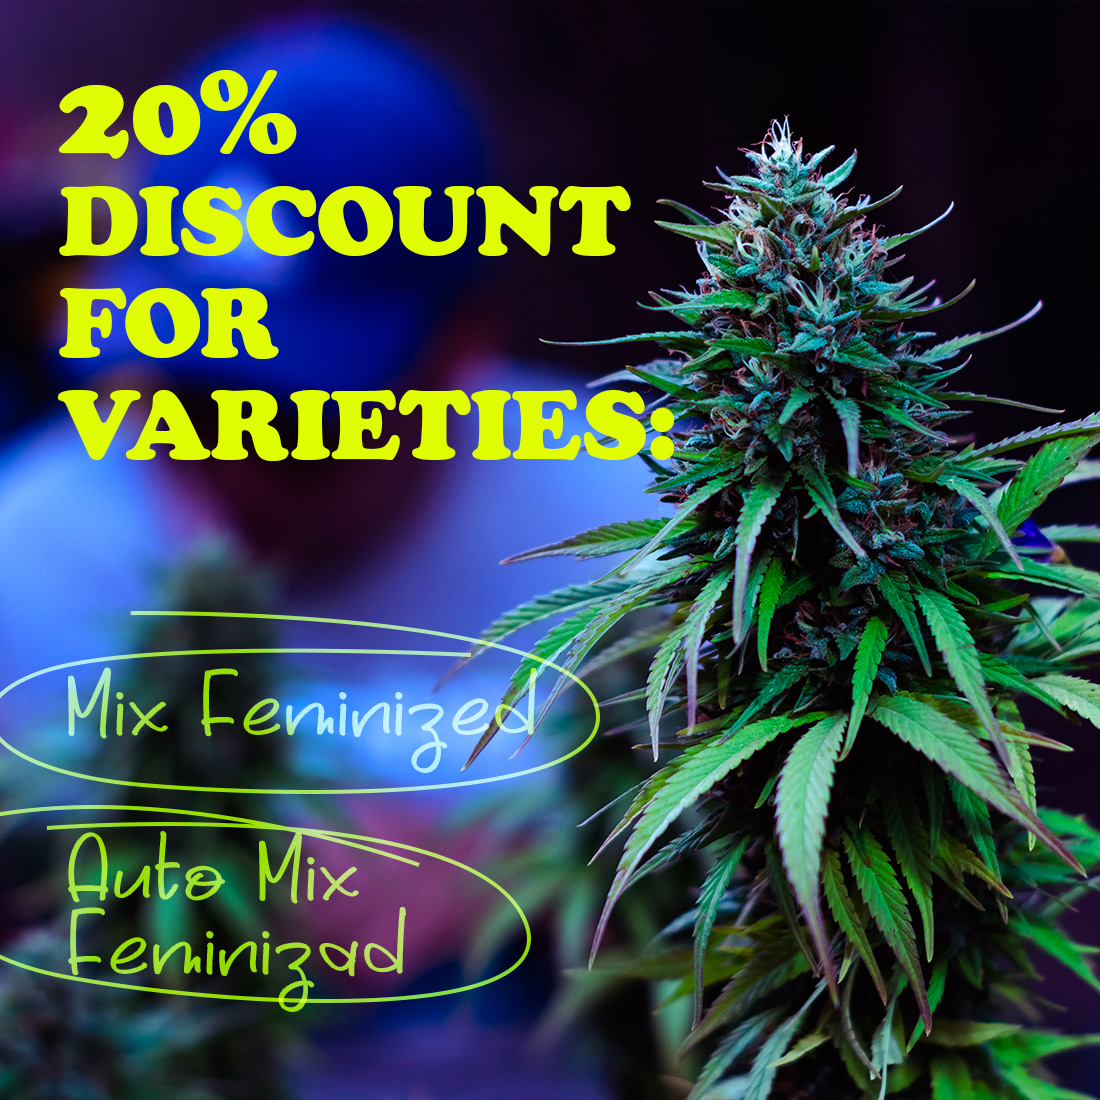 ‼️ PROMO OF THE WEEK ‼️ 
MIX and AUTO MIX Feminized seed packets are now 20% OFF! 🤩

Don't miss the chance and hurry to buy them at 👉 seedsmafia.com/en 😎

#cannabislegalisierung #cannabissale #cannabisdiscount